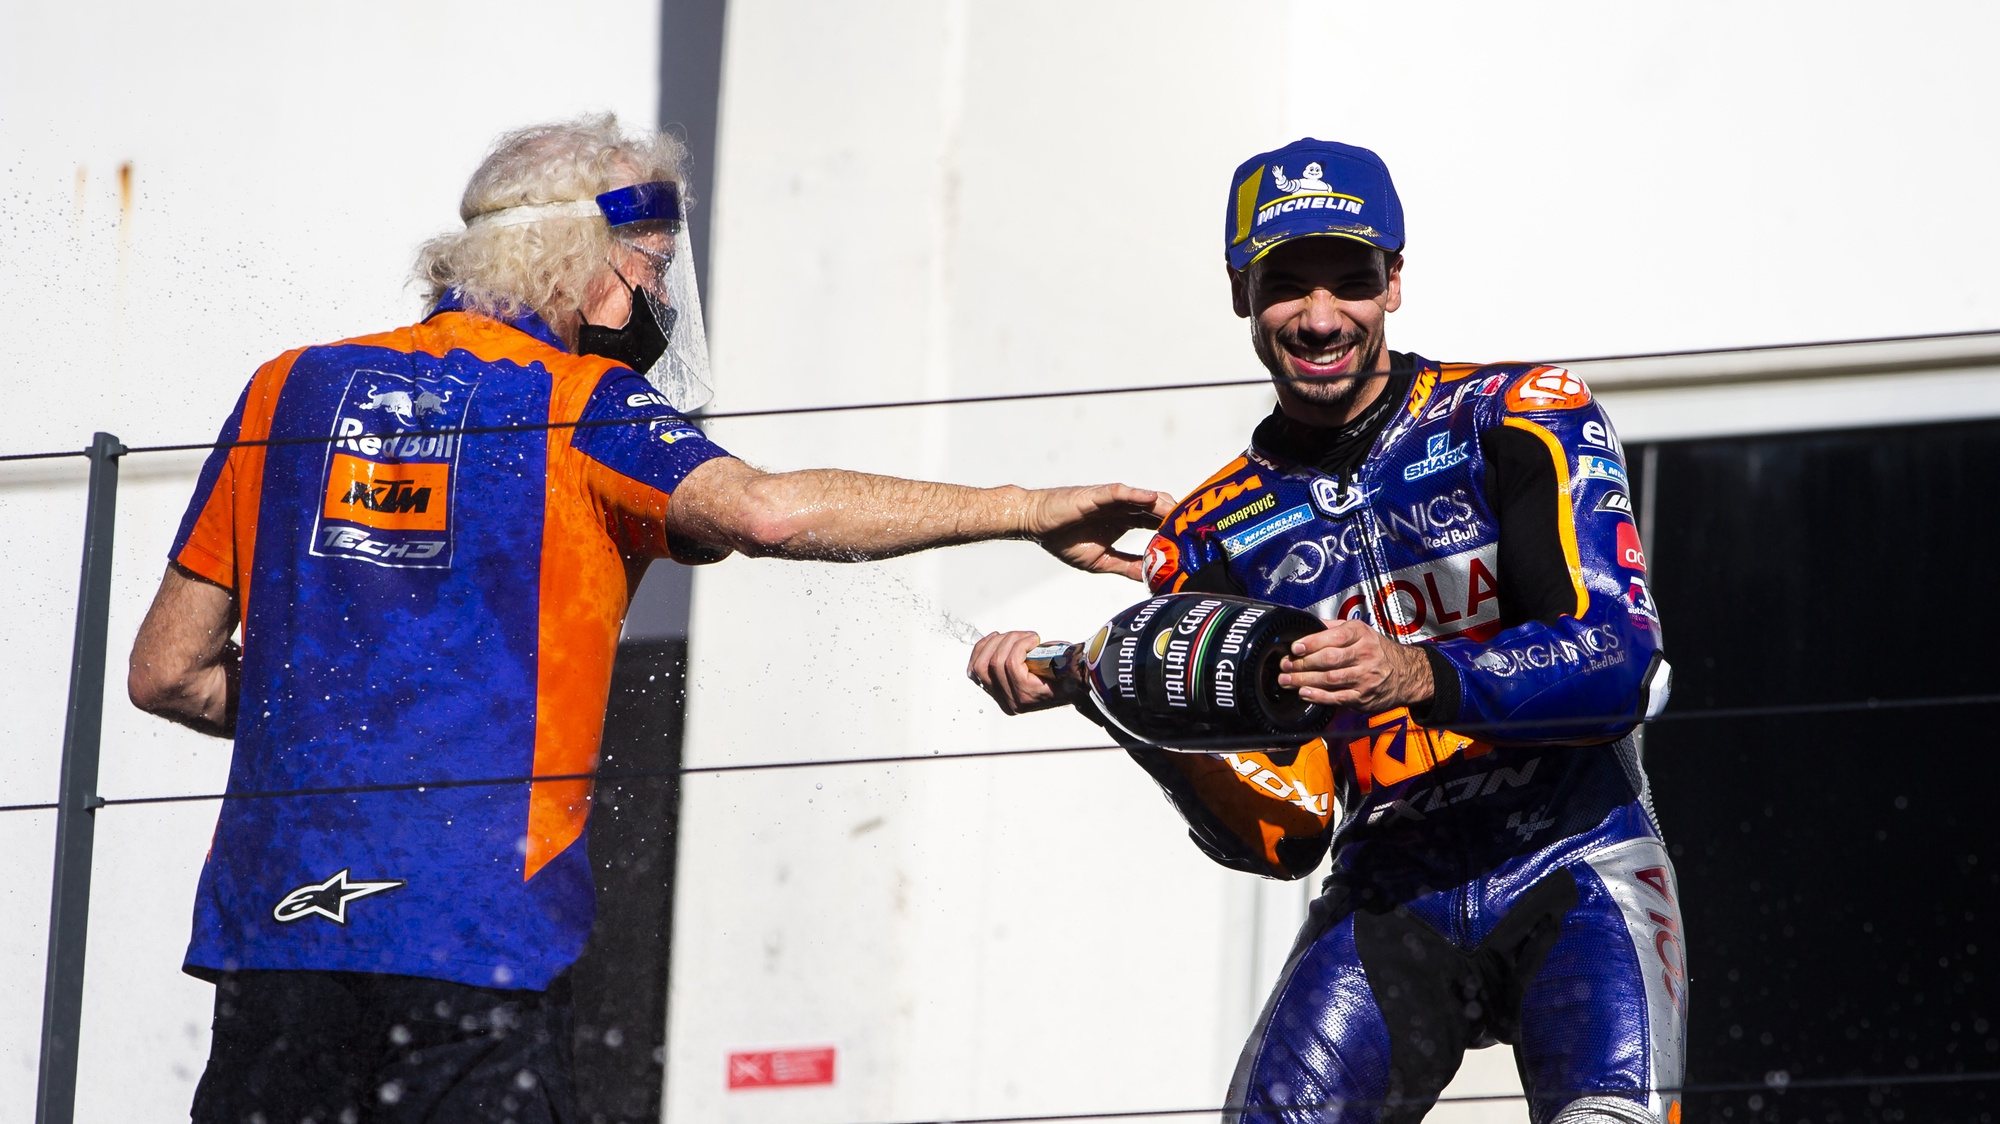 Portuguese rider Miguel Oliveira of KTM Tech 3 Team and KTM Tech 3 chief mechanic Guy Coulon celebrate on the podium after winning the Motorcycling Grand Prix of Portugal at Algarve International race track, south of Portugal, 22 November 2020.JOSE SENA GOULAO/LUSA